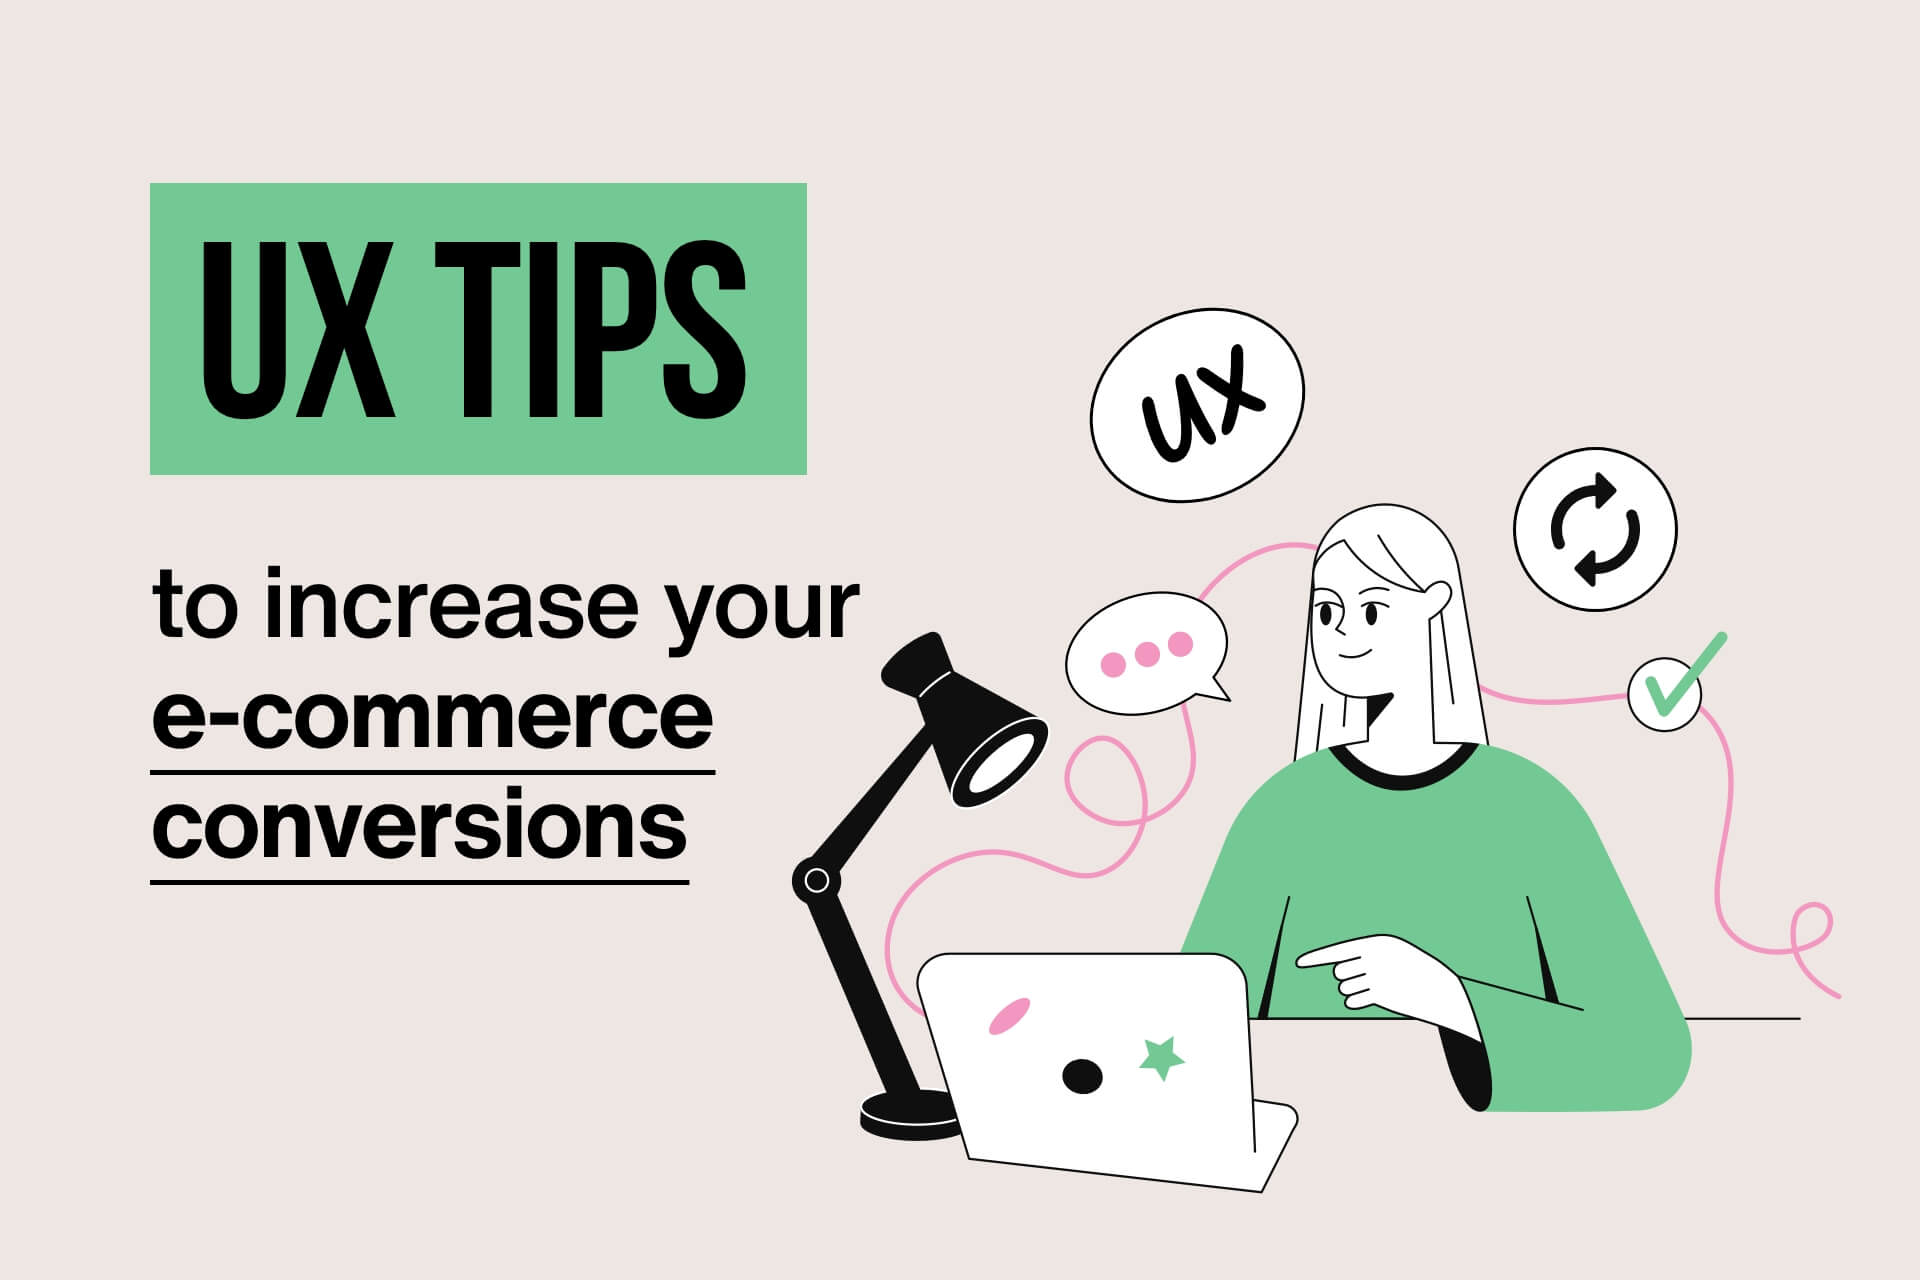 22 UX Tips Increase E-Commerce Conversion Based on Benchmarks of 6 Top E-commerce Sites